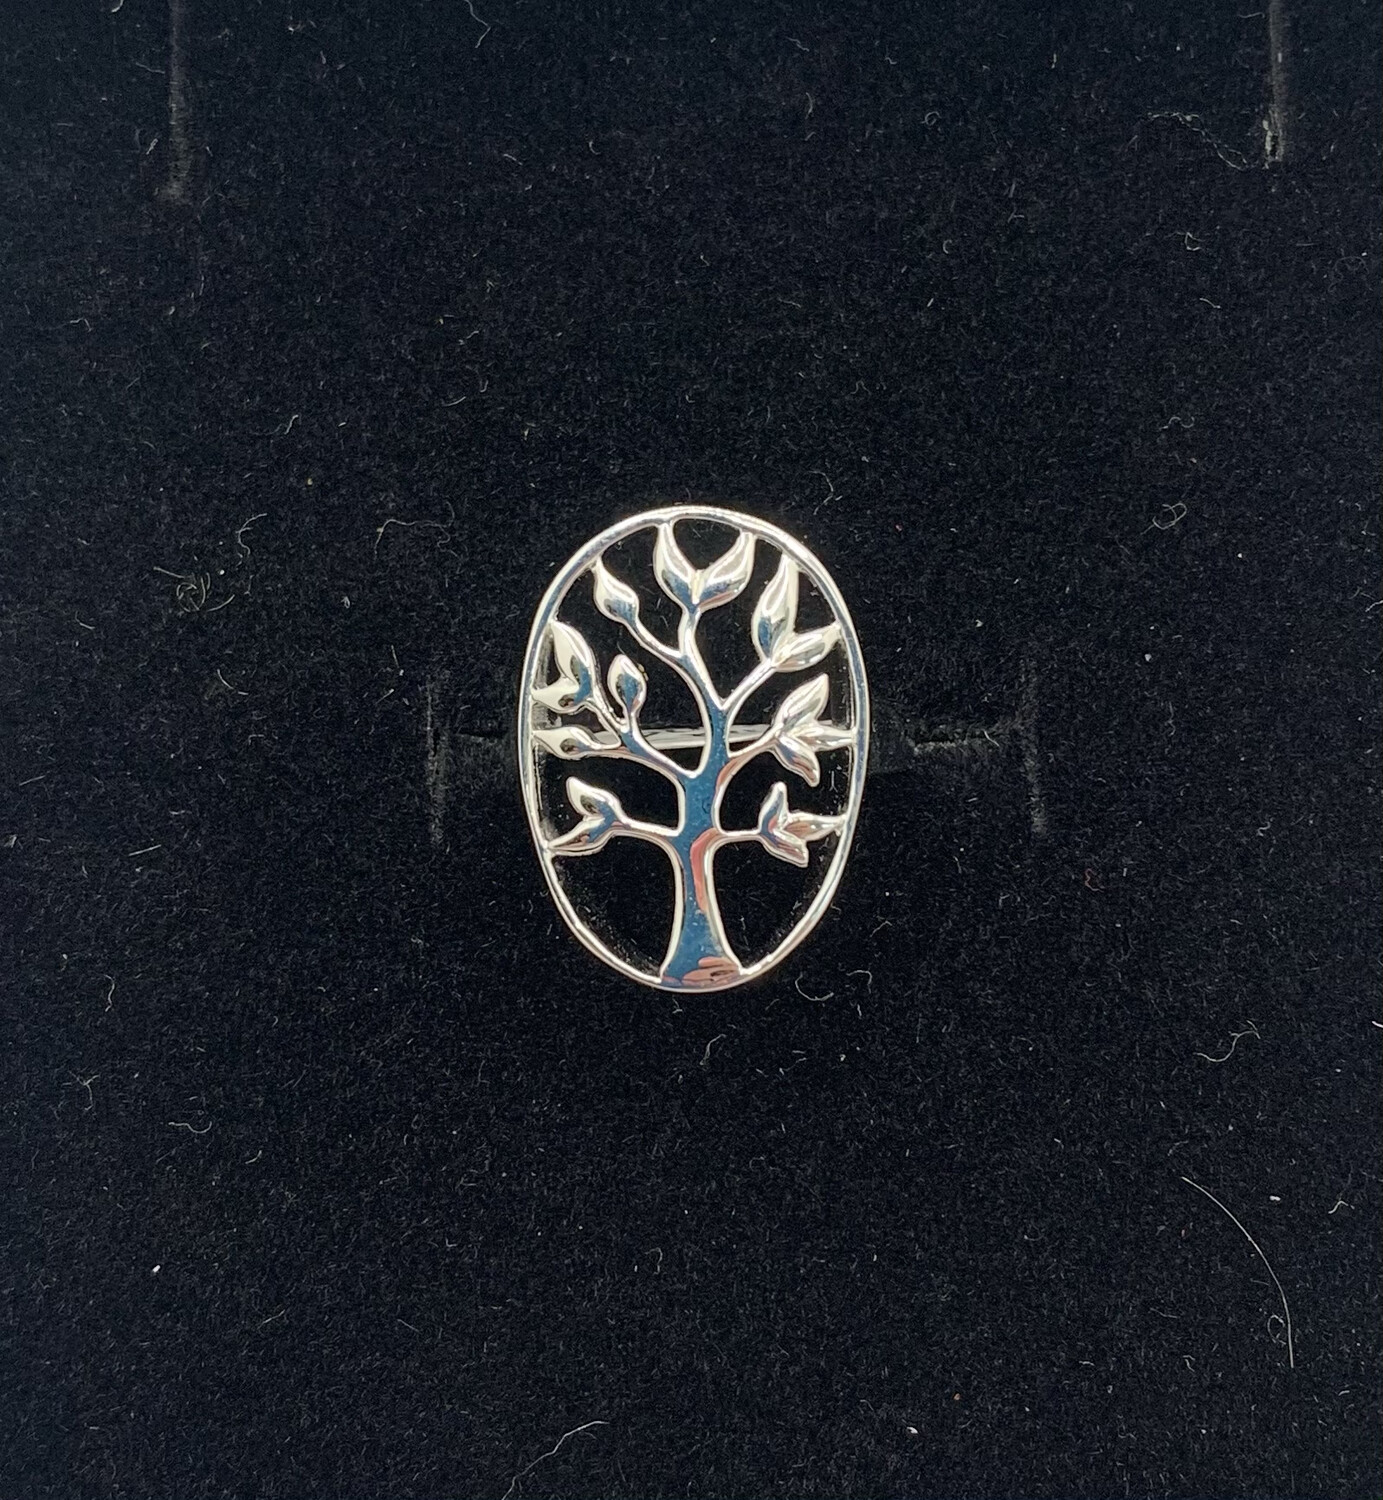 Sterling Silver Tree Ring